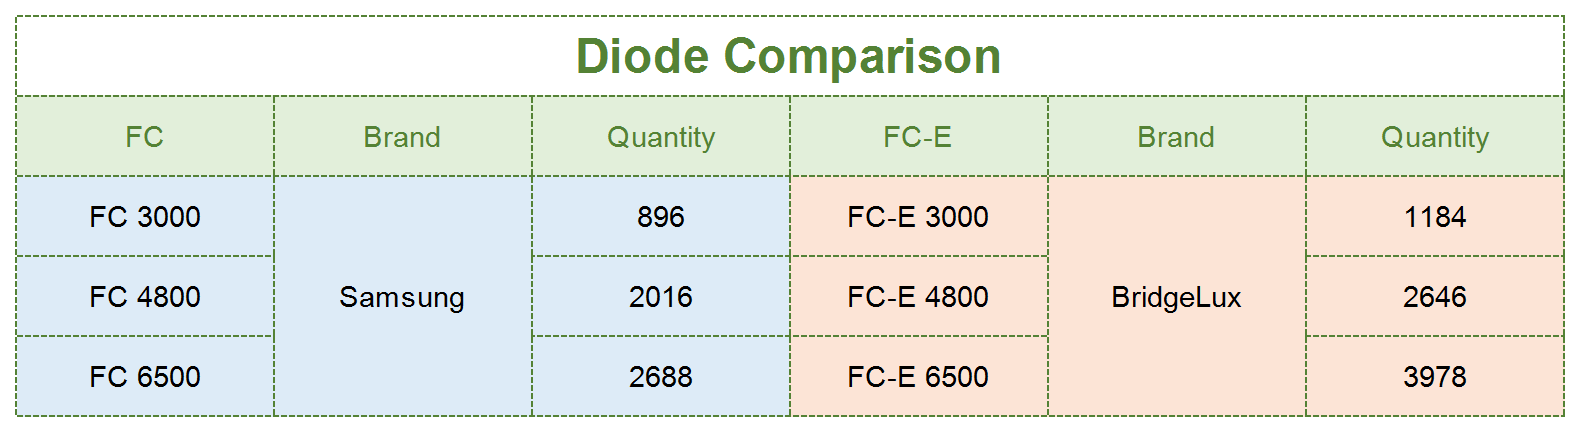 the diode difference between FC series and FC-E series